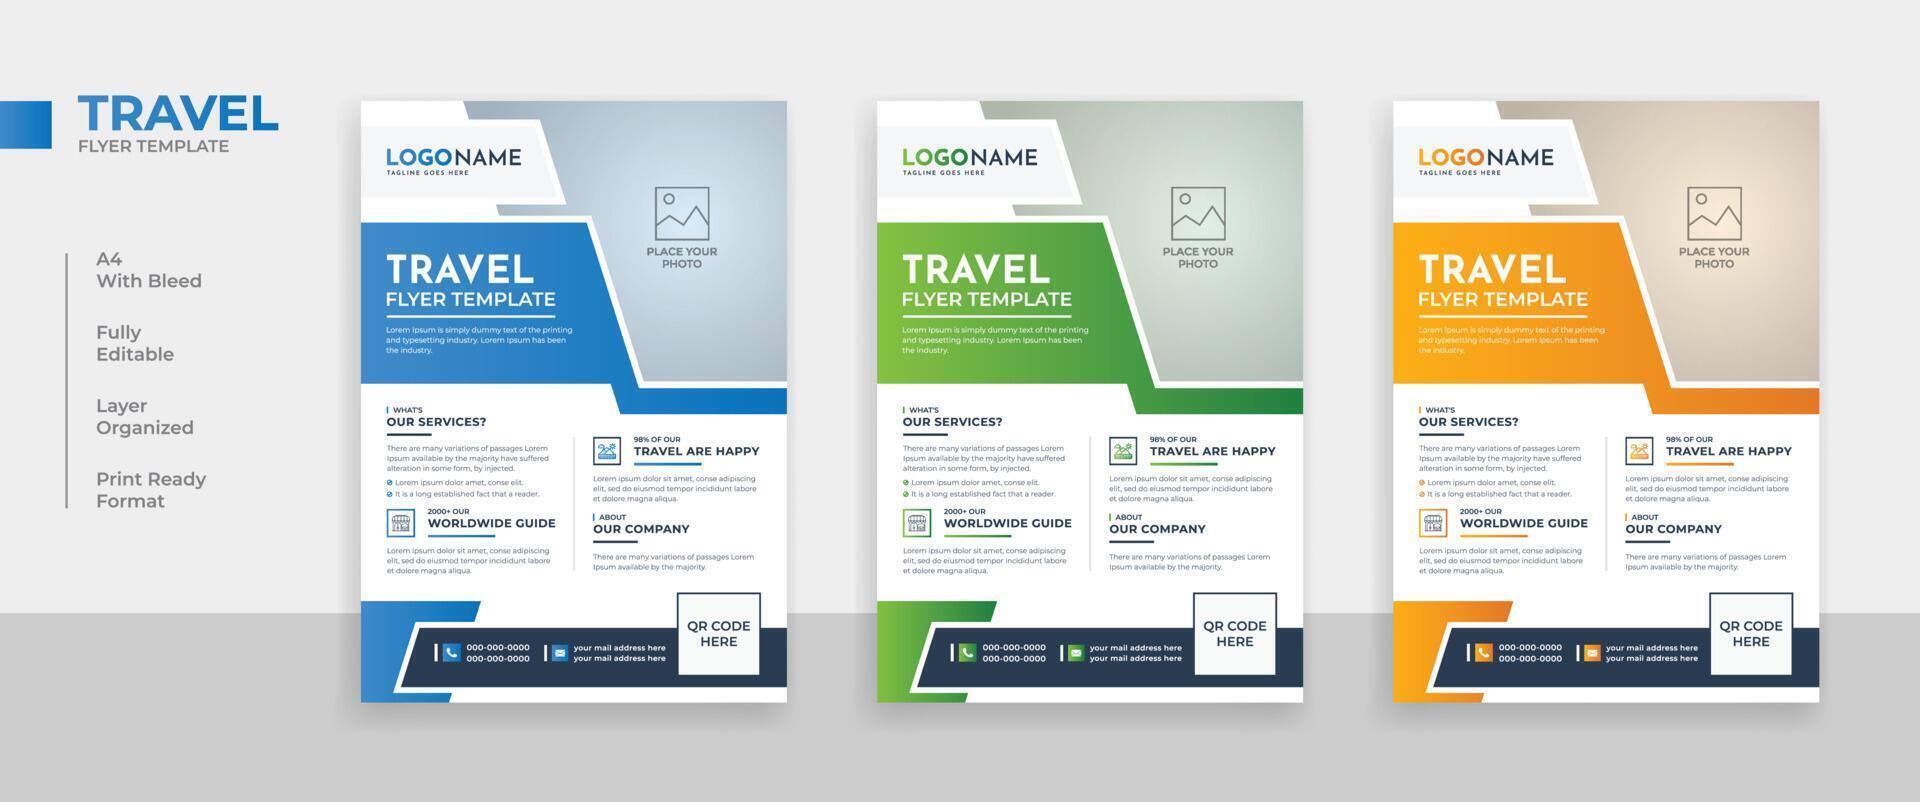 Modern travel agency flyer template design, traveling poster template layout vector